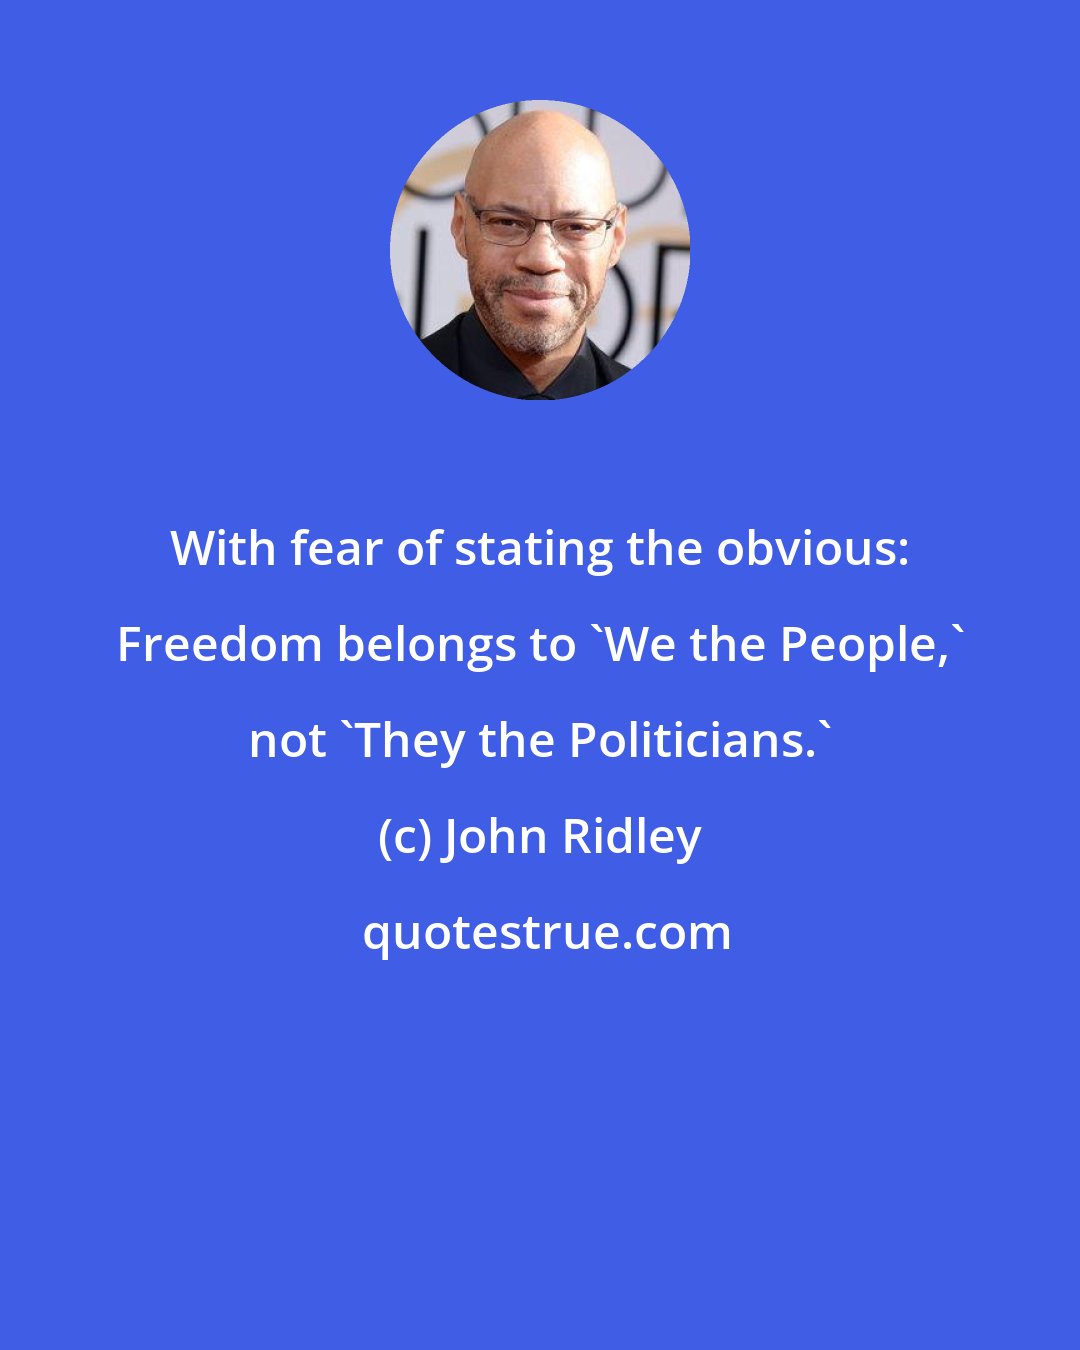 John Ridley: With fear of stating the obvious: Freedom belongs to 'We the People,' not 'They the Politicians.'